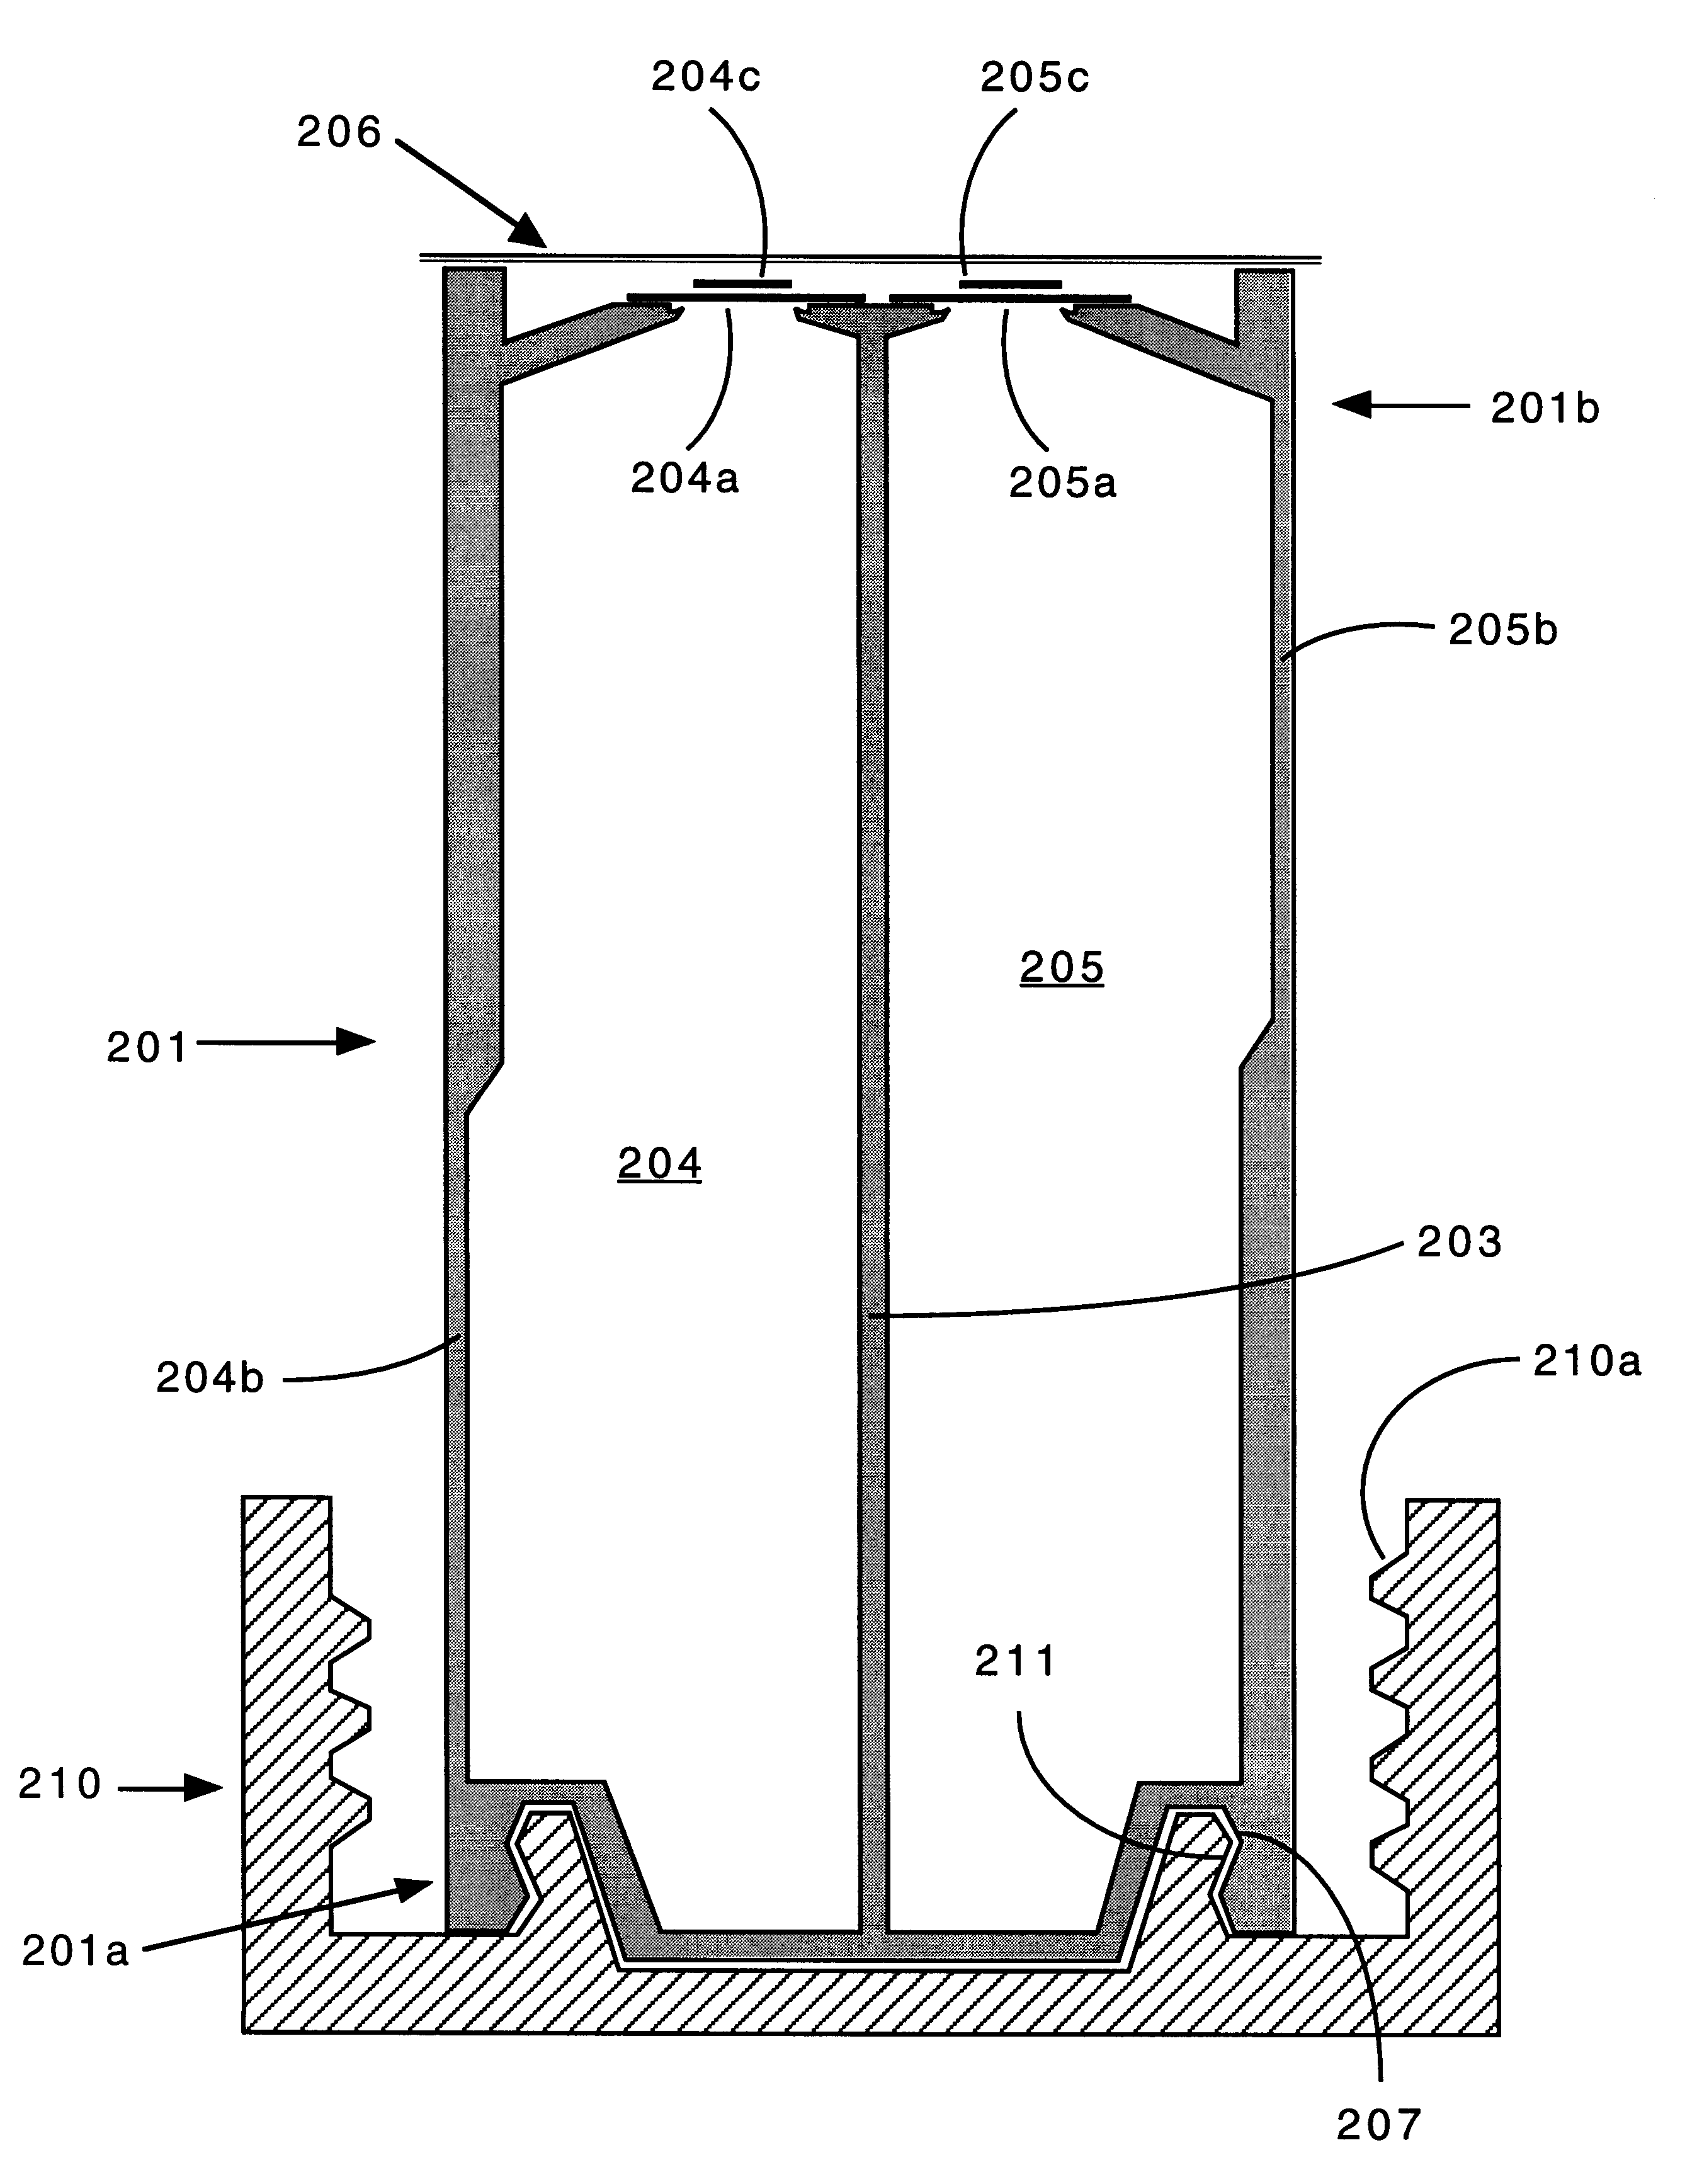 Device for maintaining separate ingredients in liquid food products